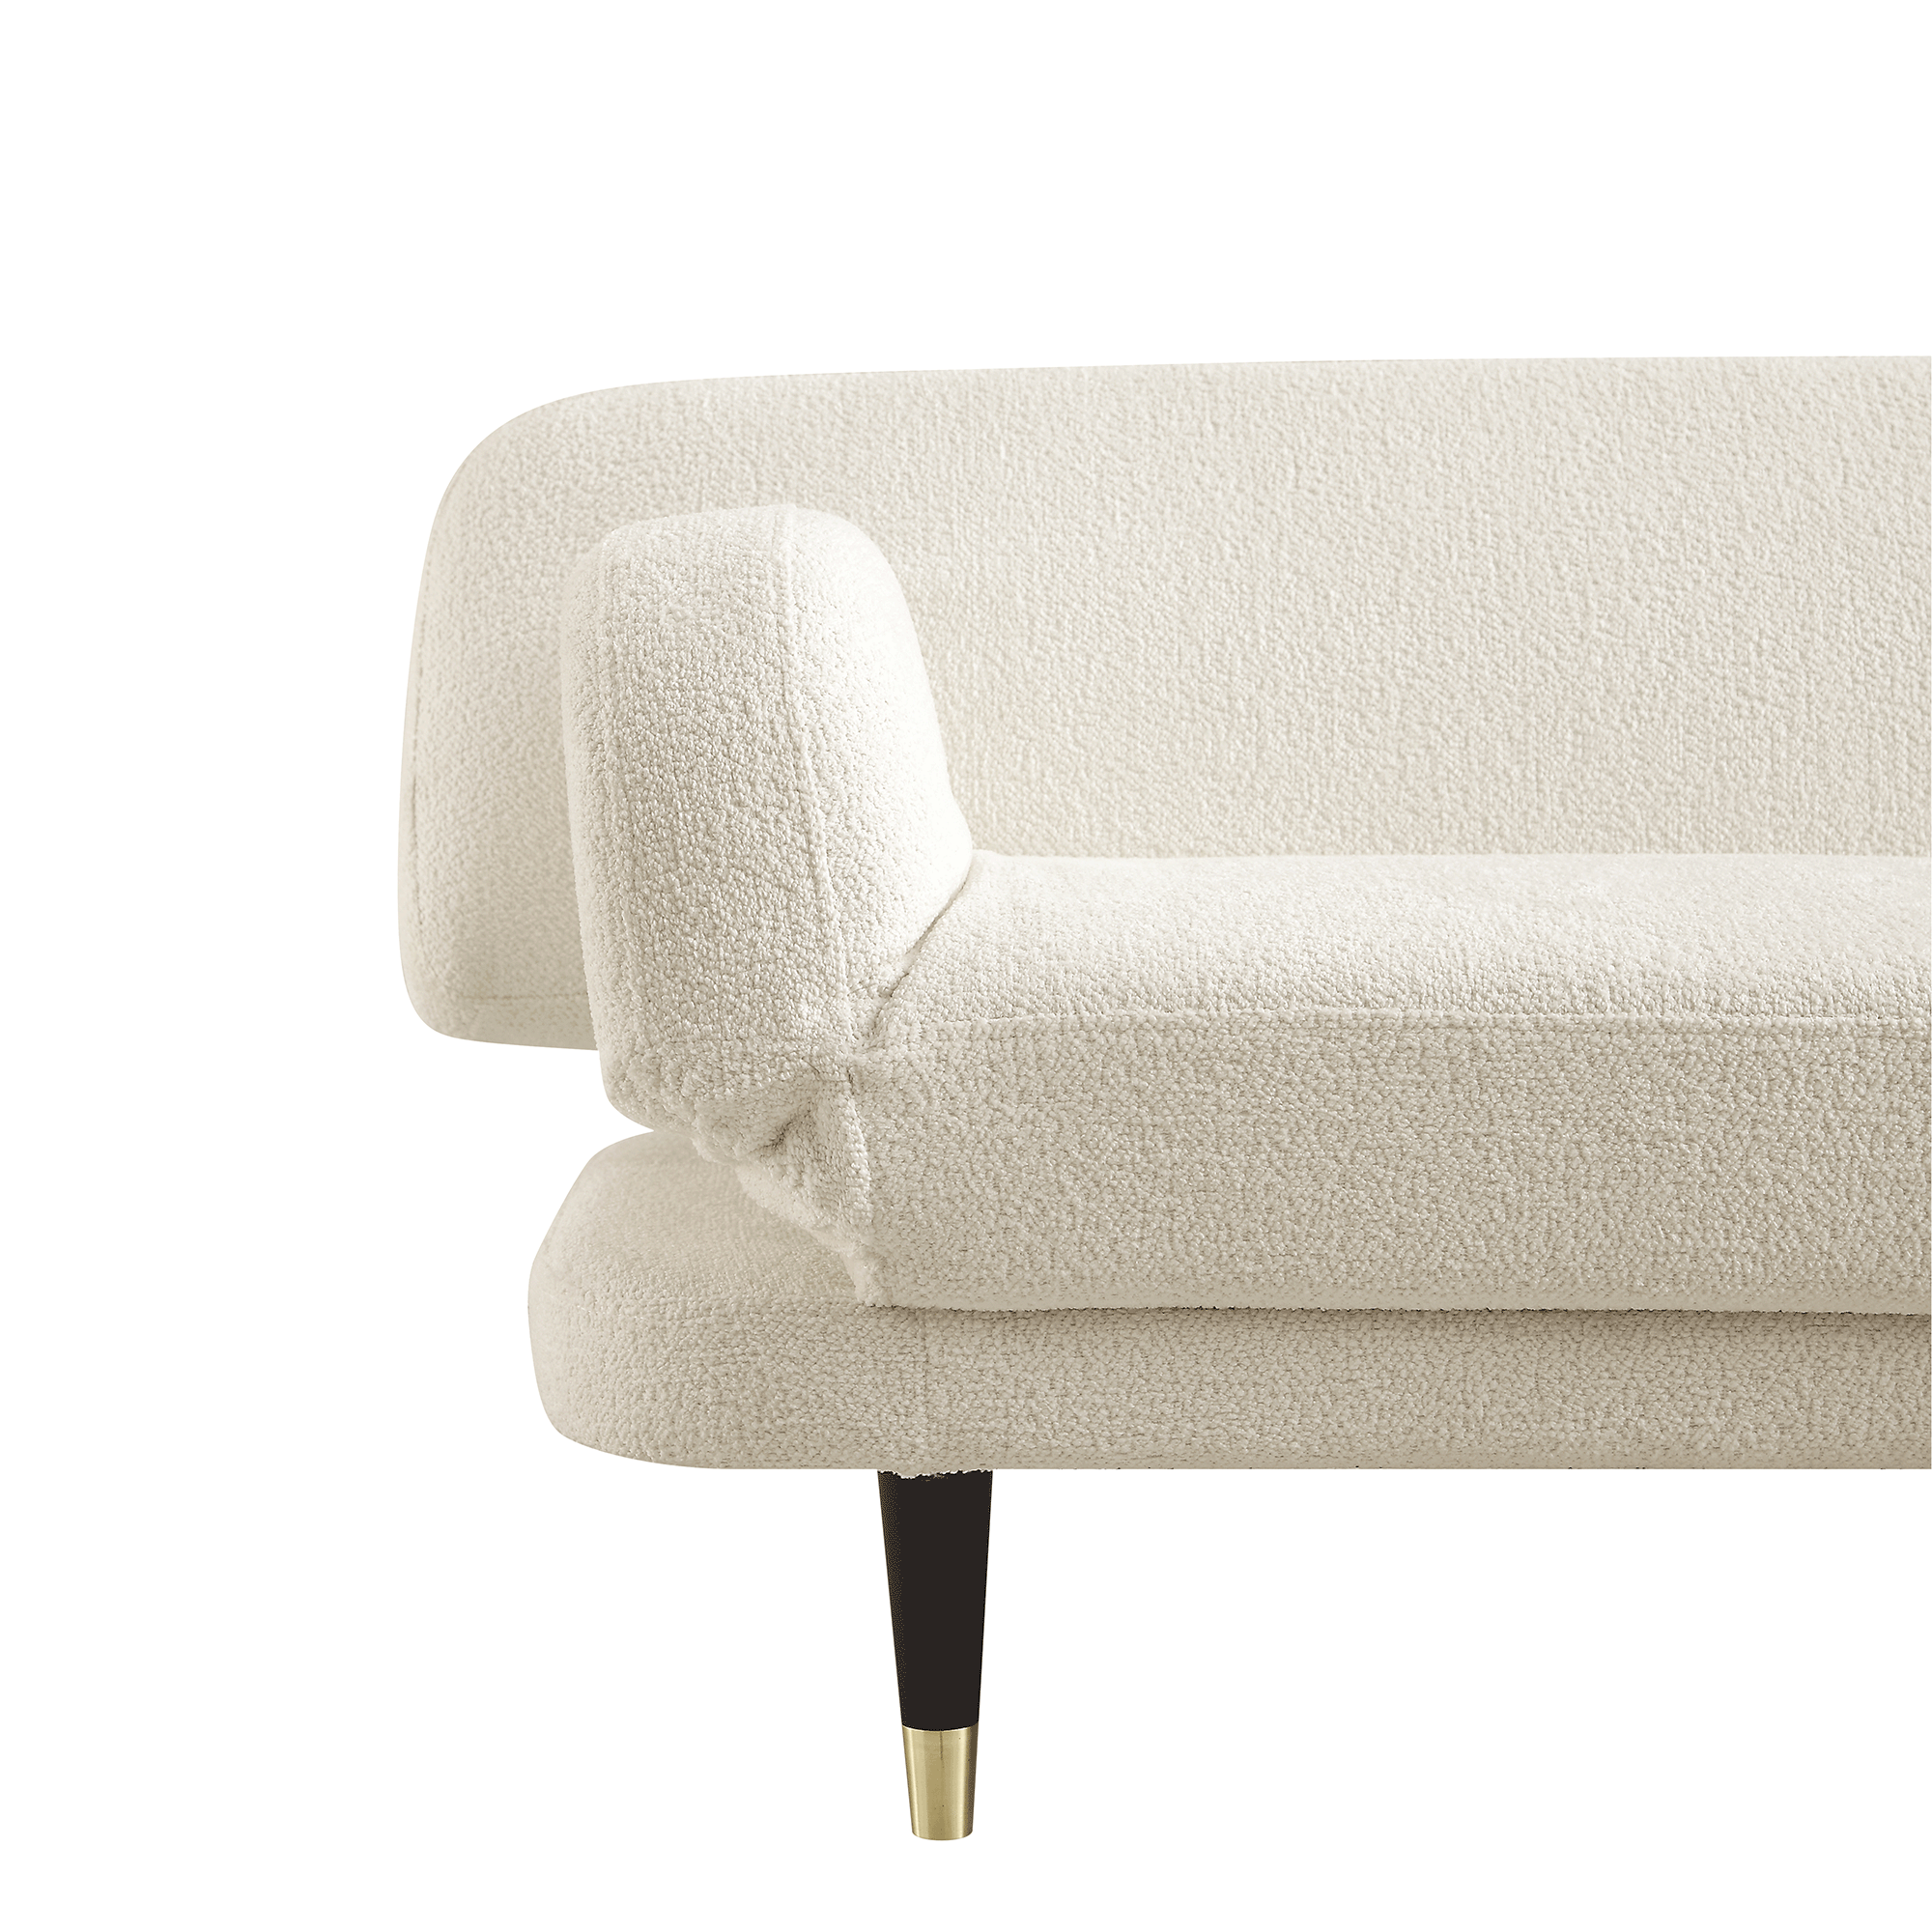 Solna 2-Seater Sofa Bed, Beige Boucle